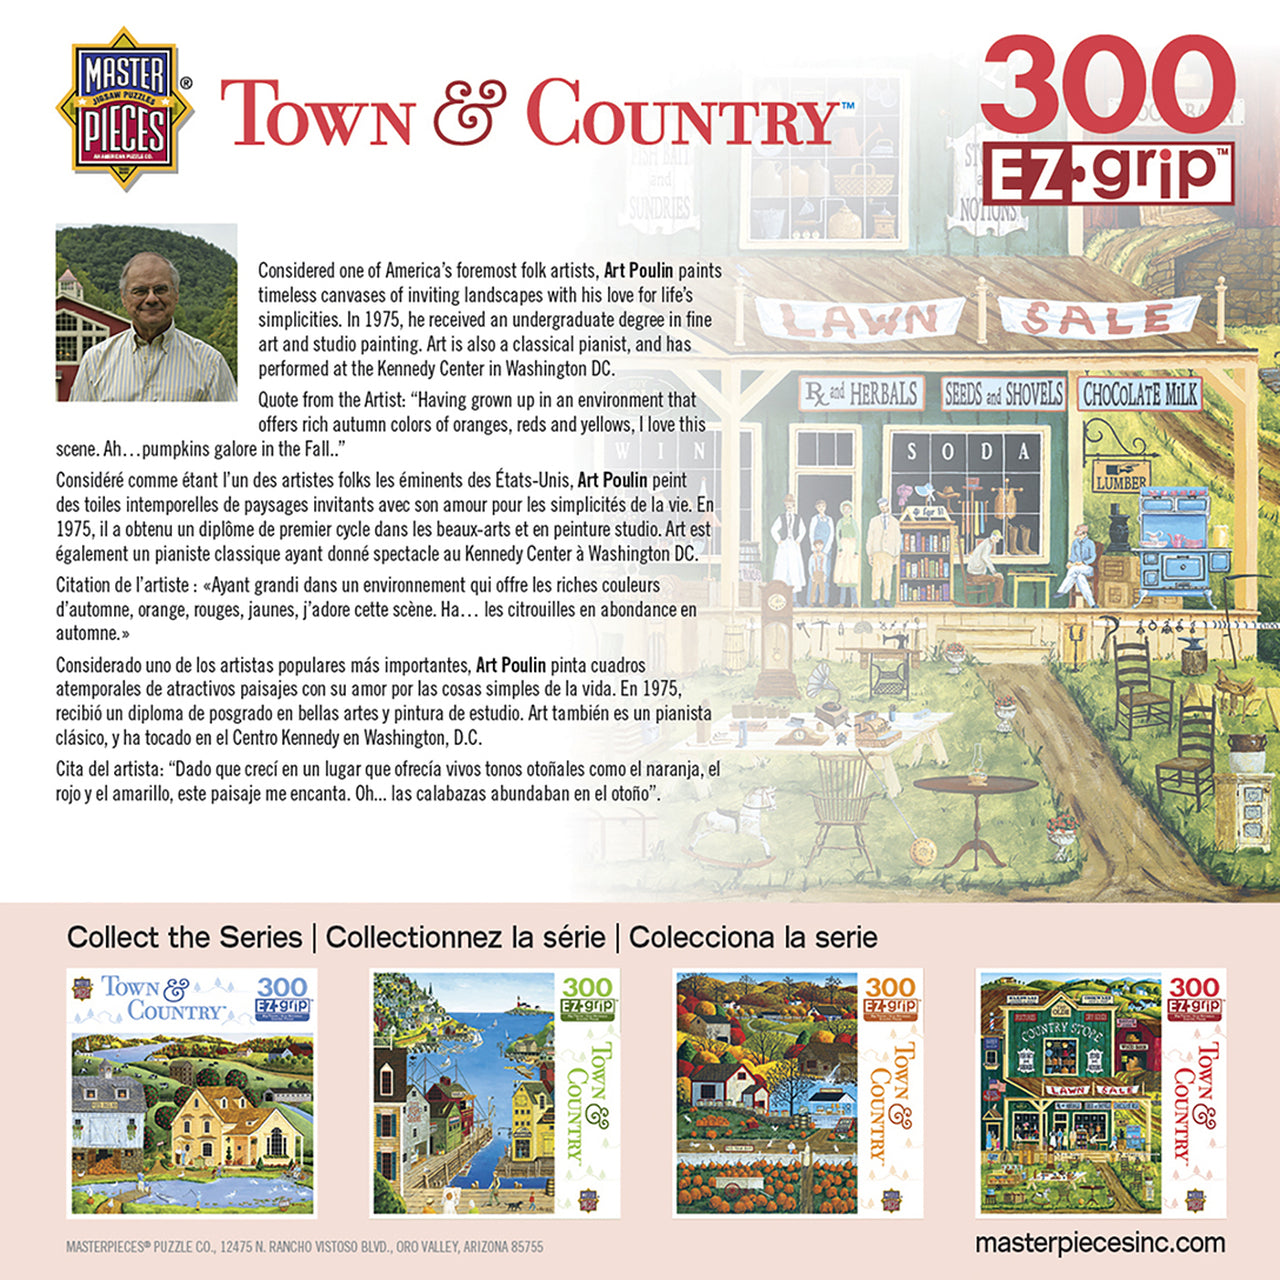 Town & Country The Old Country Store - Large 300 Piece EZGrip Jigsaw Puzzle by Masterpieces